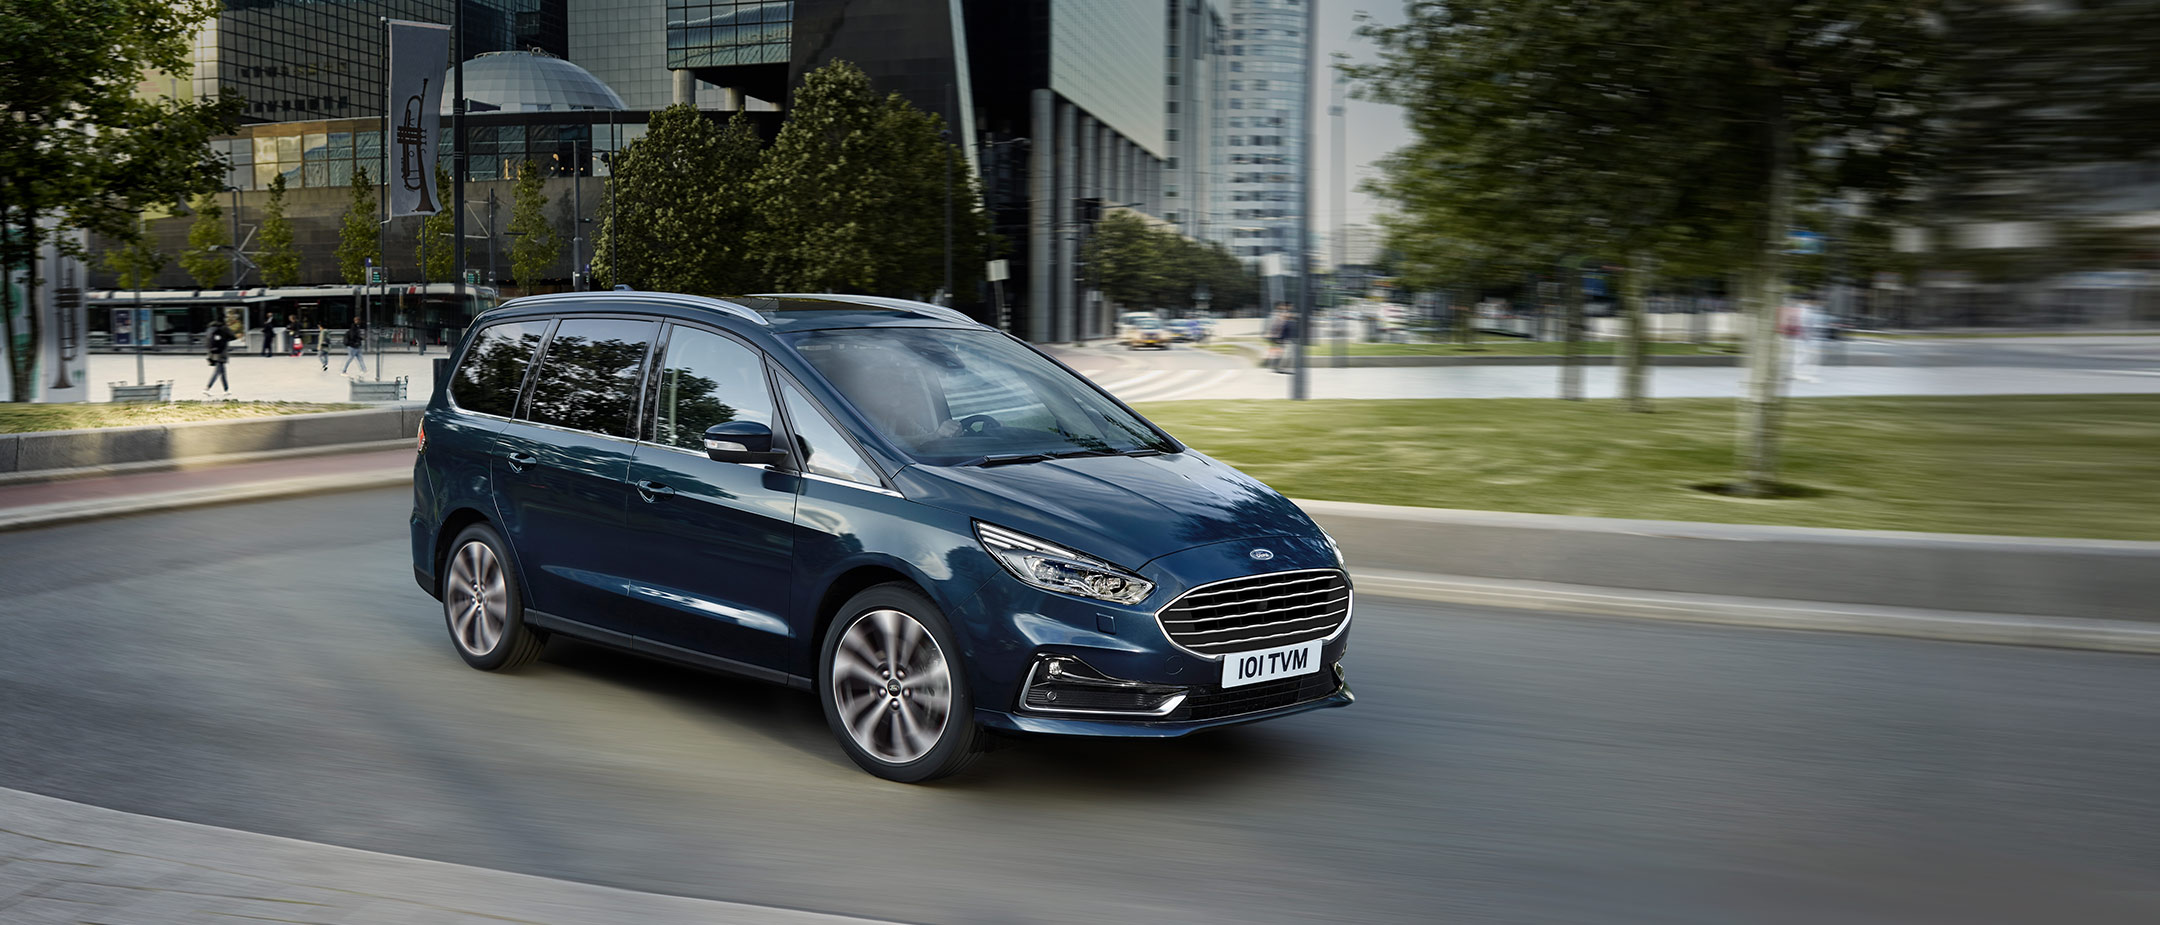 Ford Galaxy Titanium driving around the bend in city